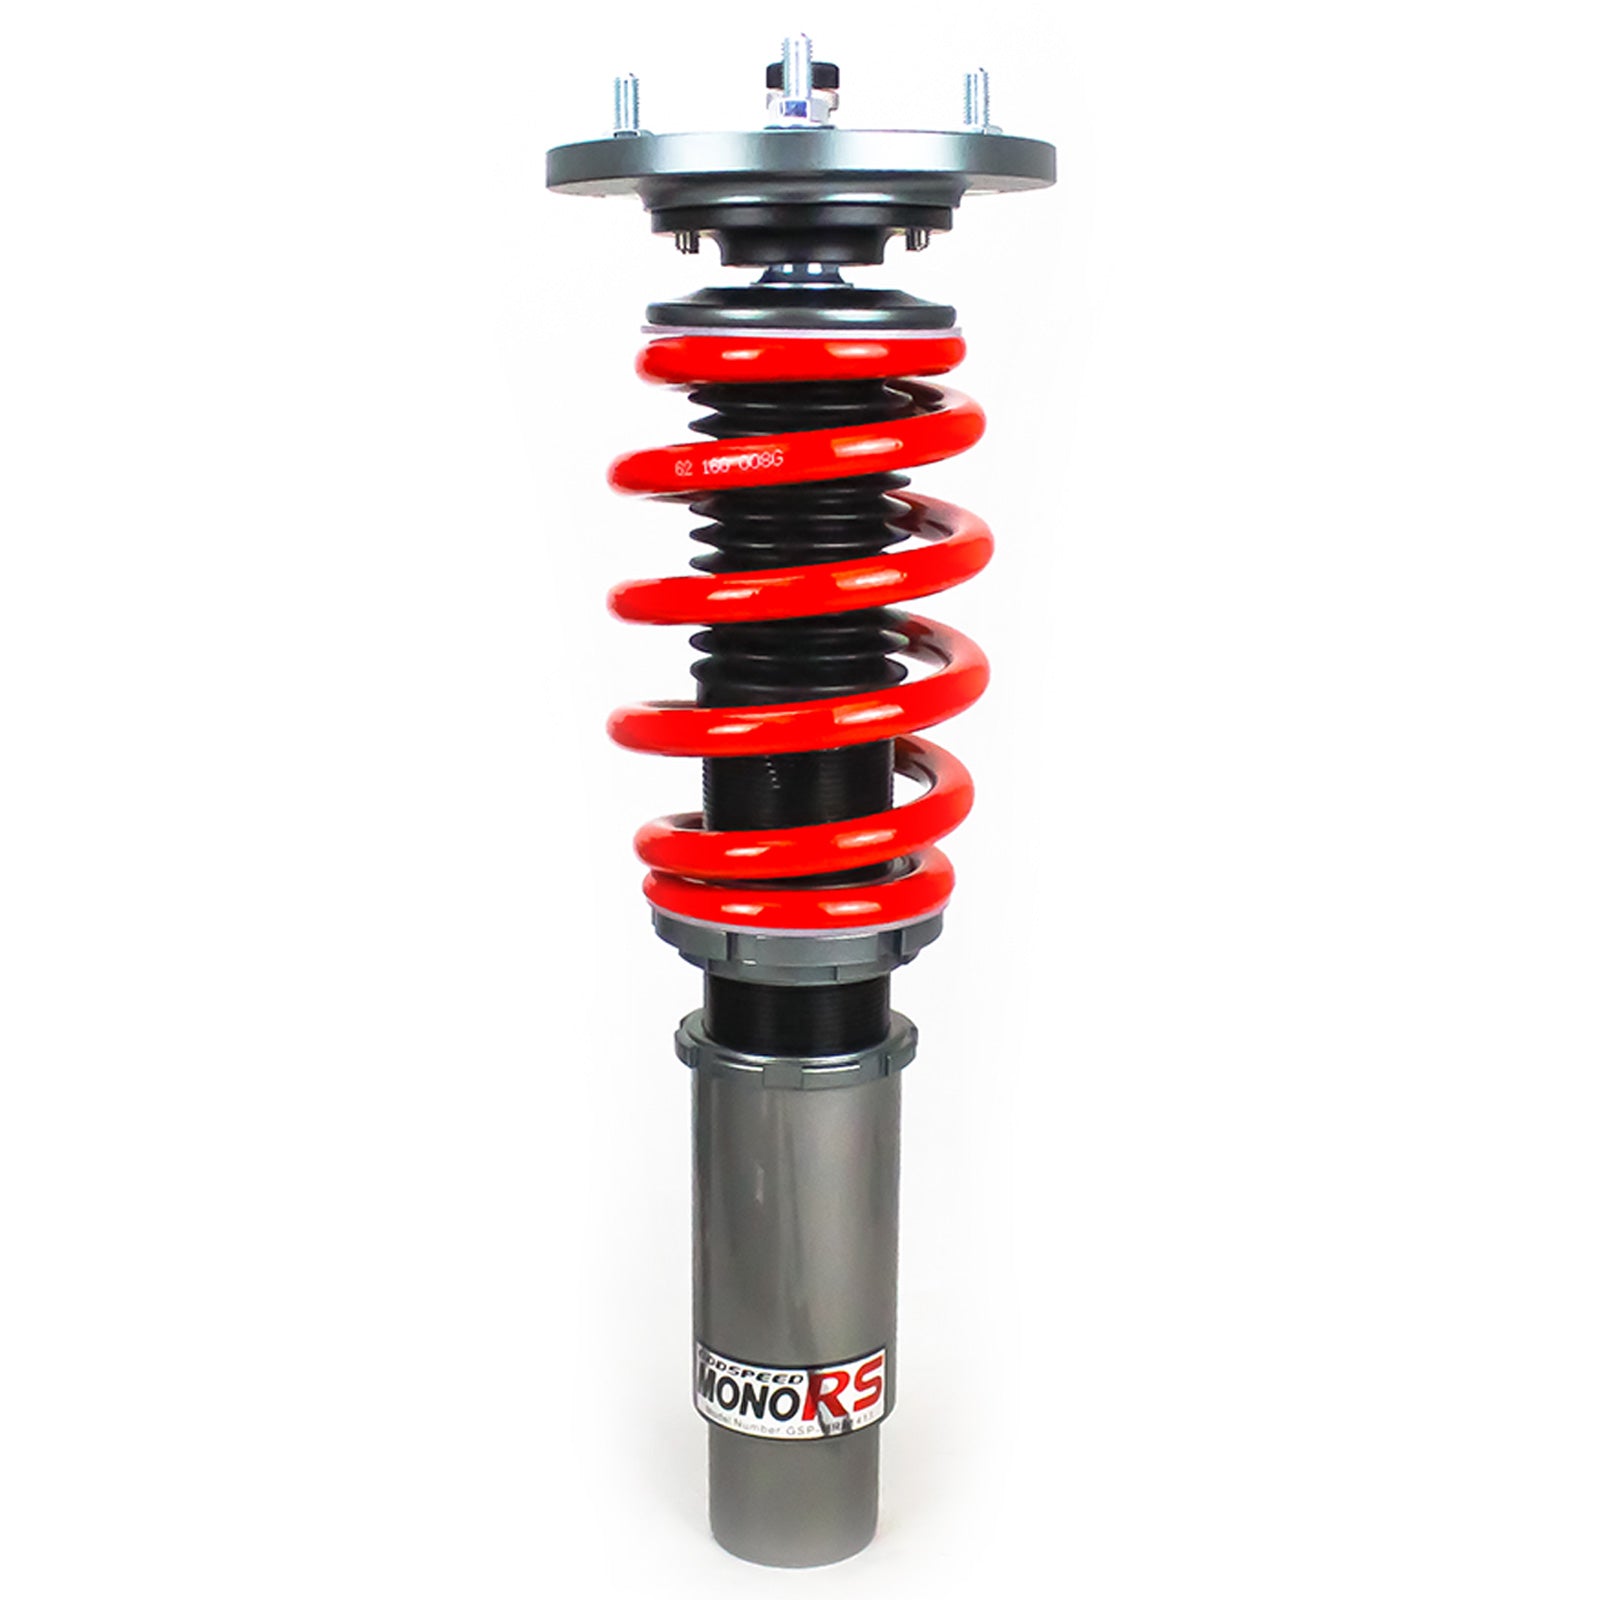 Godspeed MRS1413 MonoRS Coilover Lowering Kit, 32 Damping Adjustment, Ride Height Adjustable